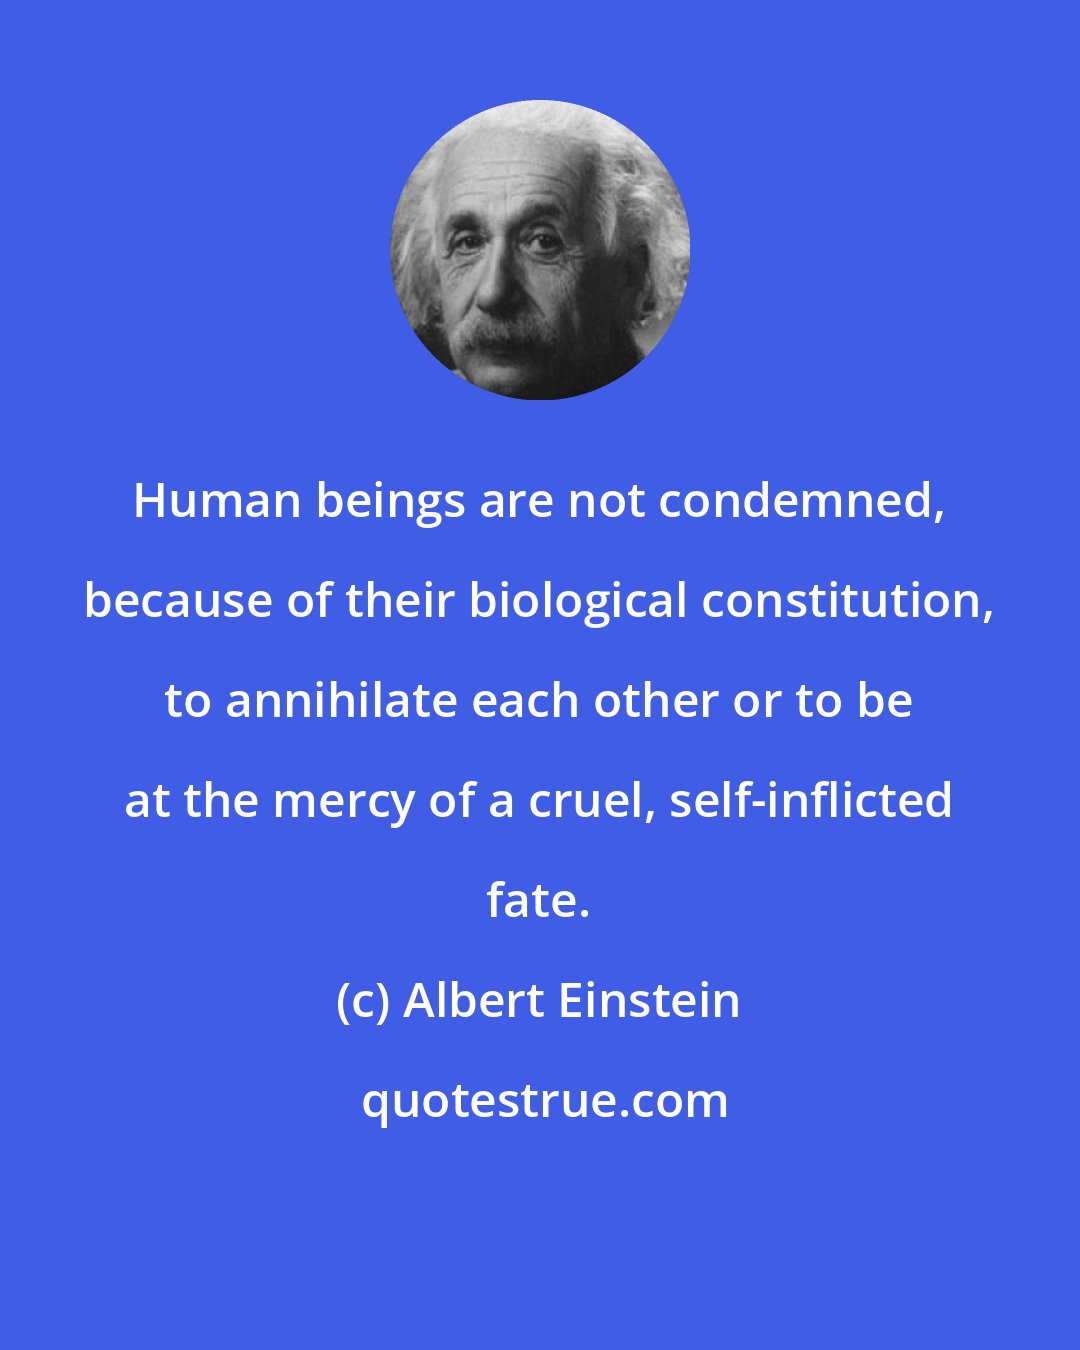 Albert Einstein: Human beings are not condemned, because of their biological constitution, to annihilate each other or to be at the mercy of a cruel, self-inflicted fate.